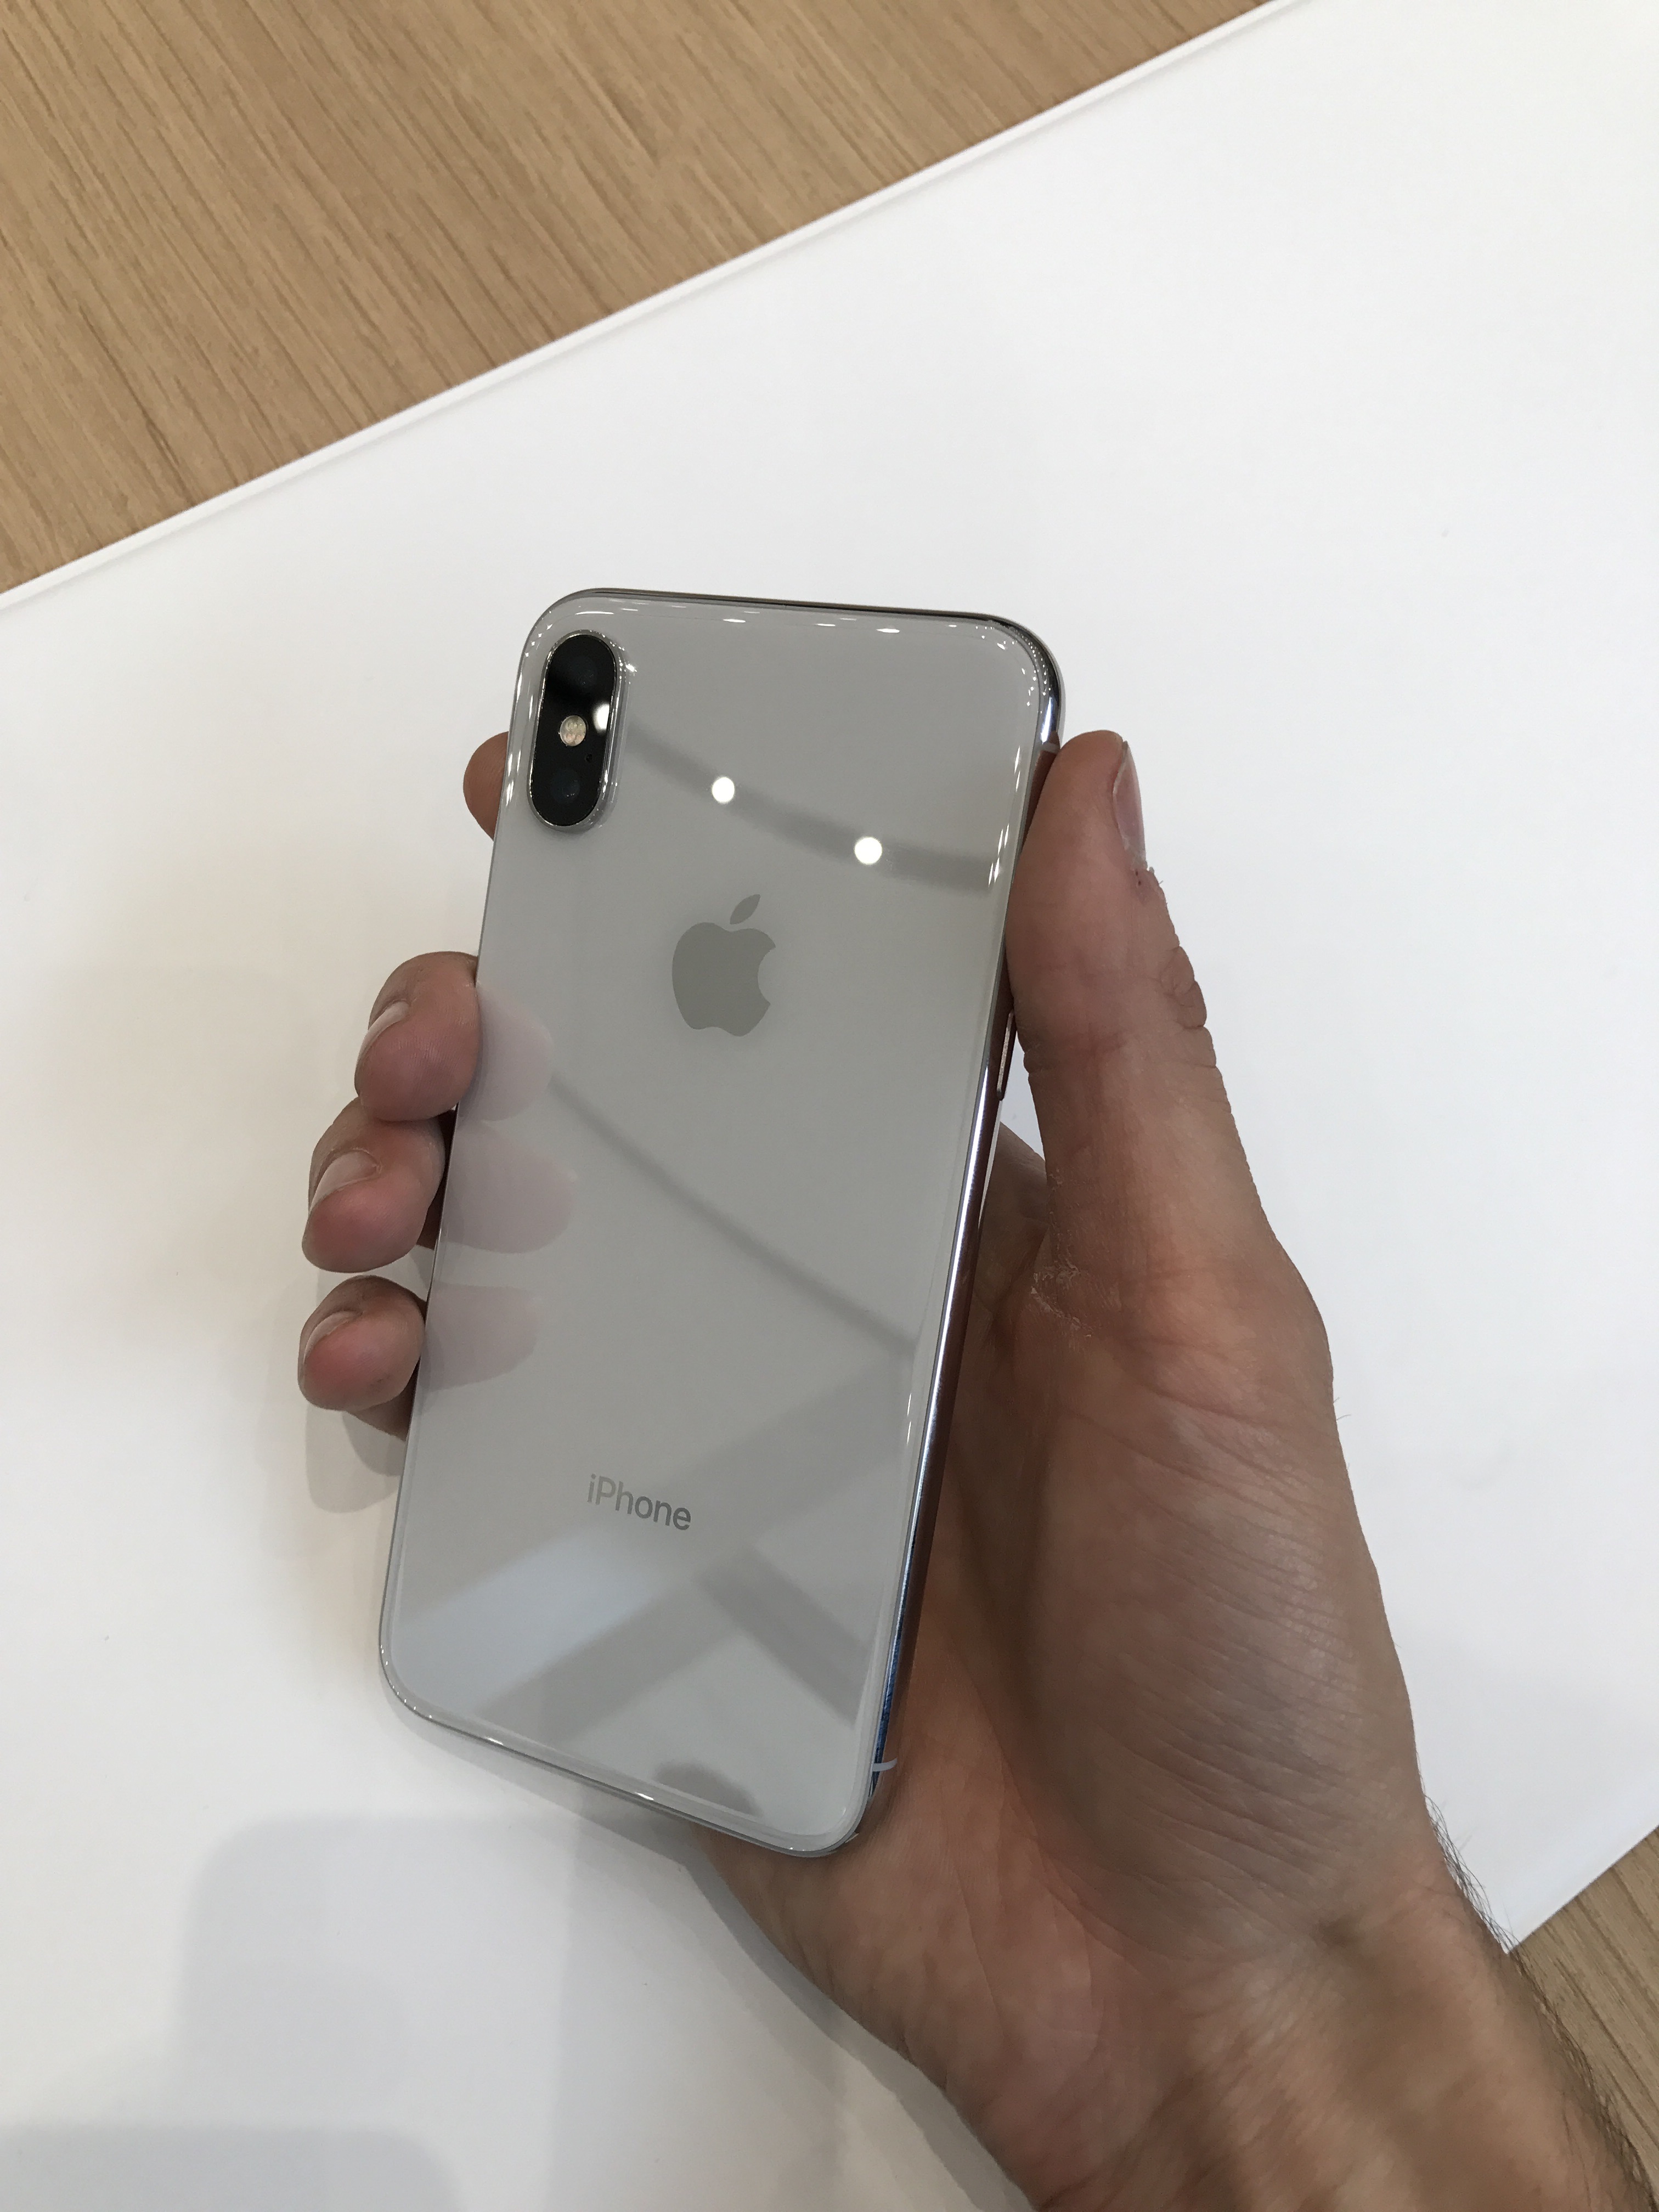 Back of the iPhone X